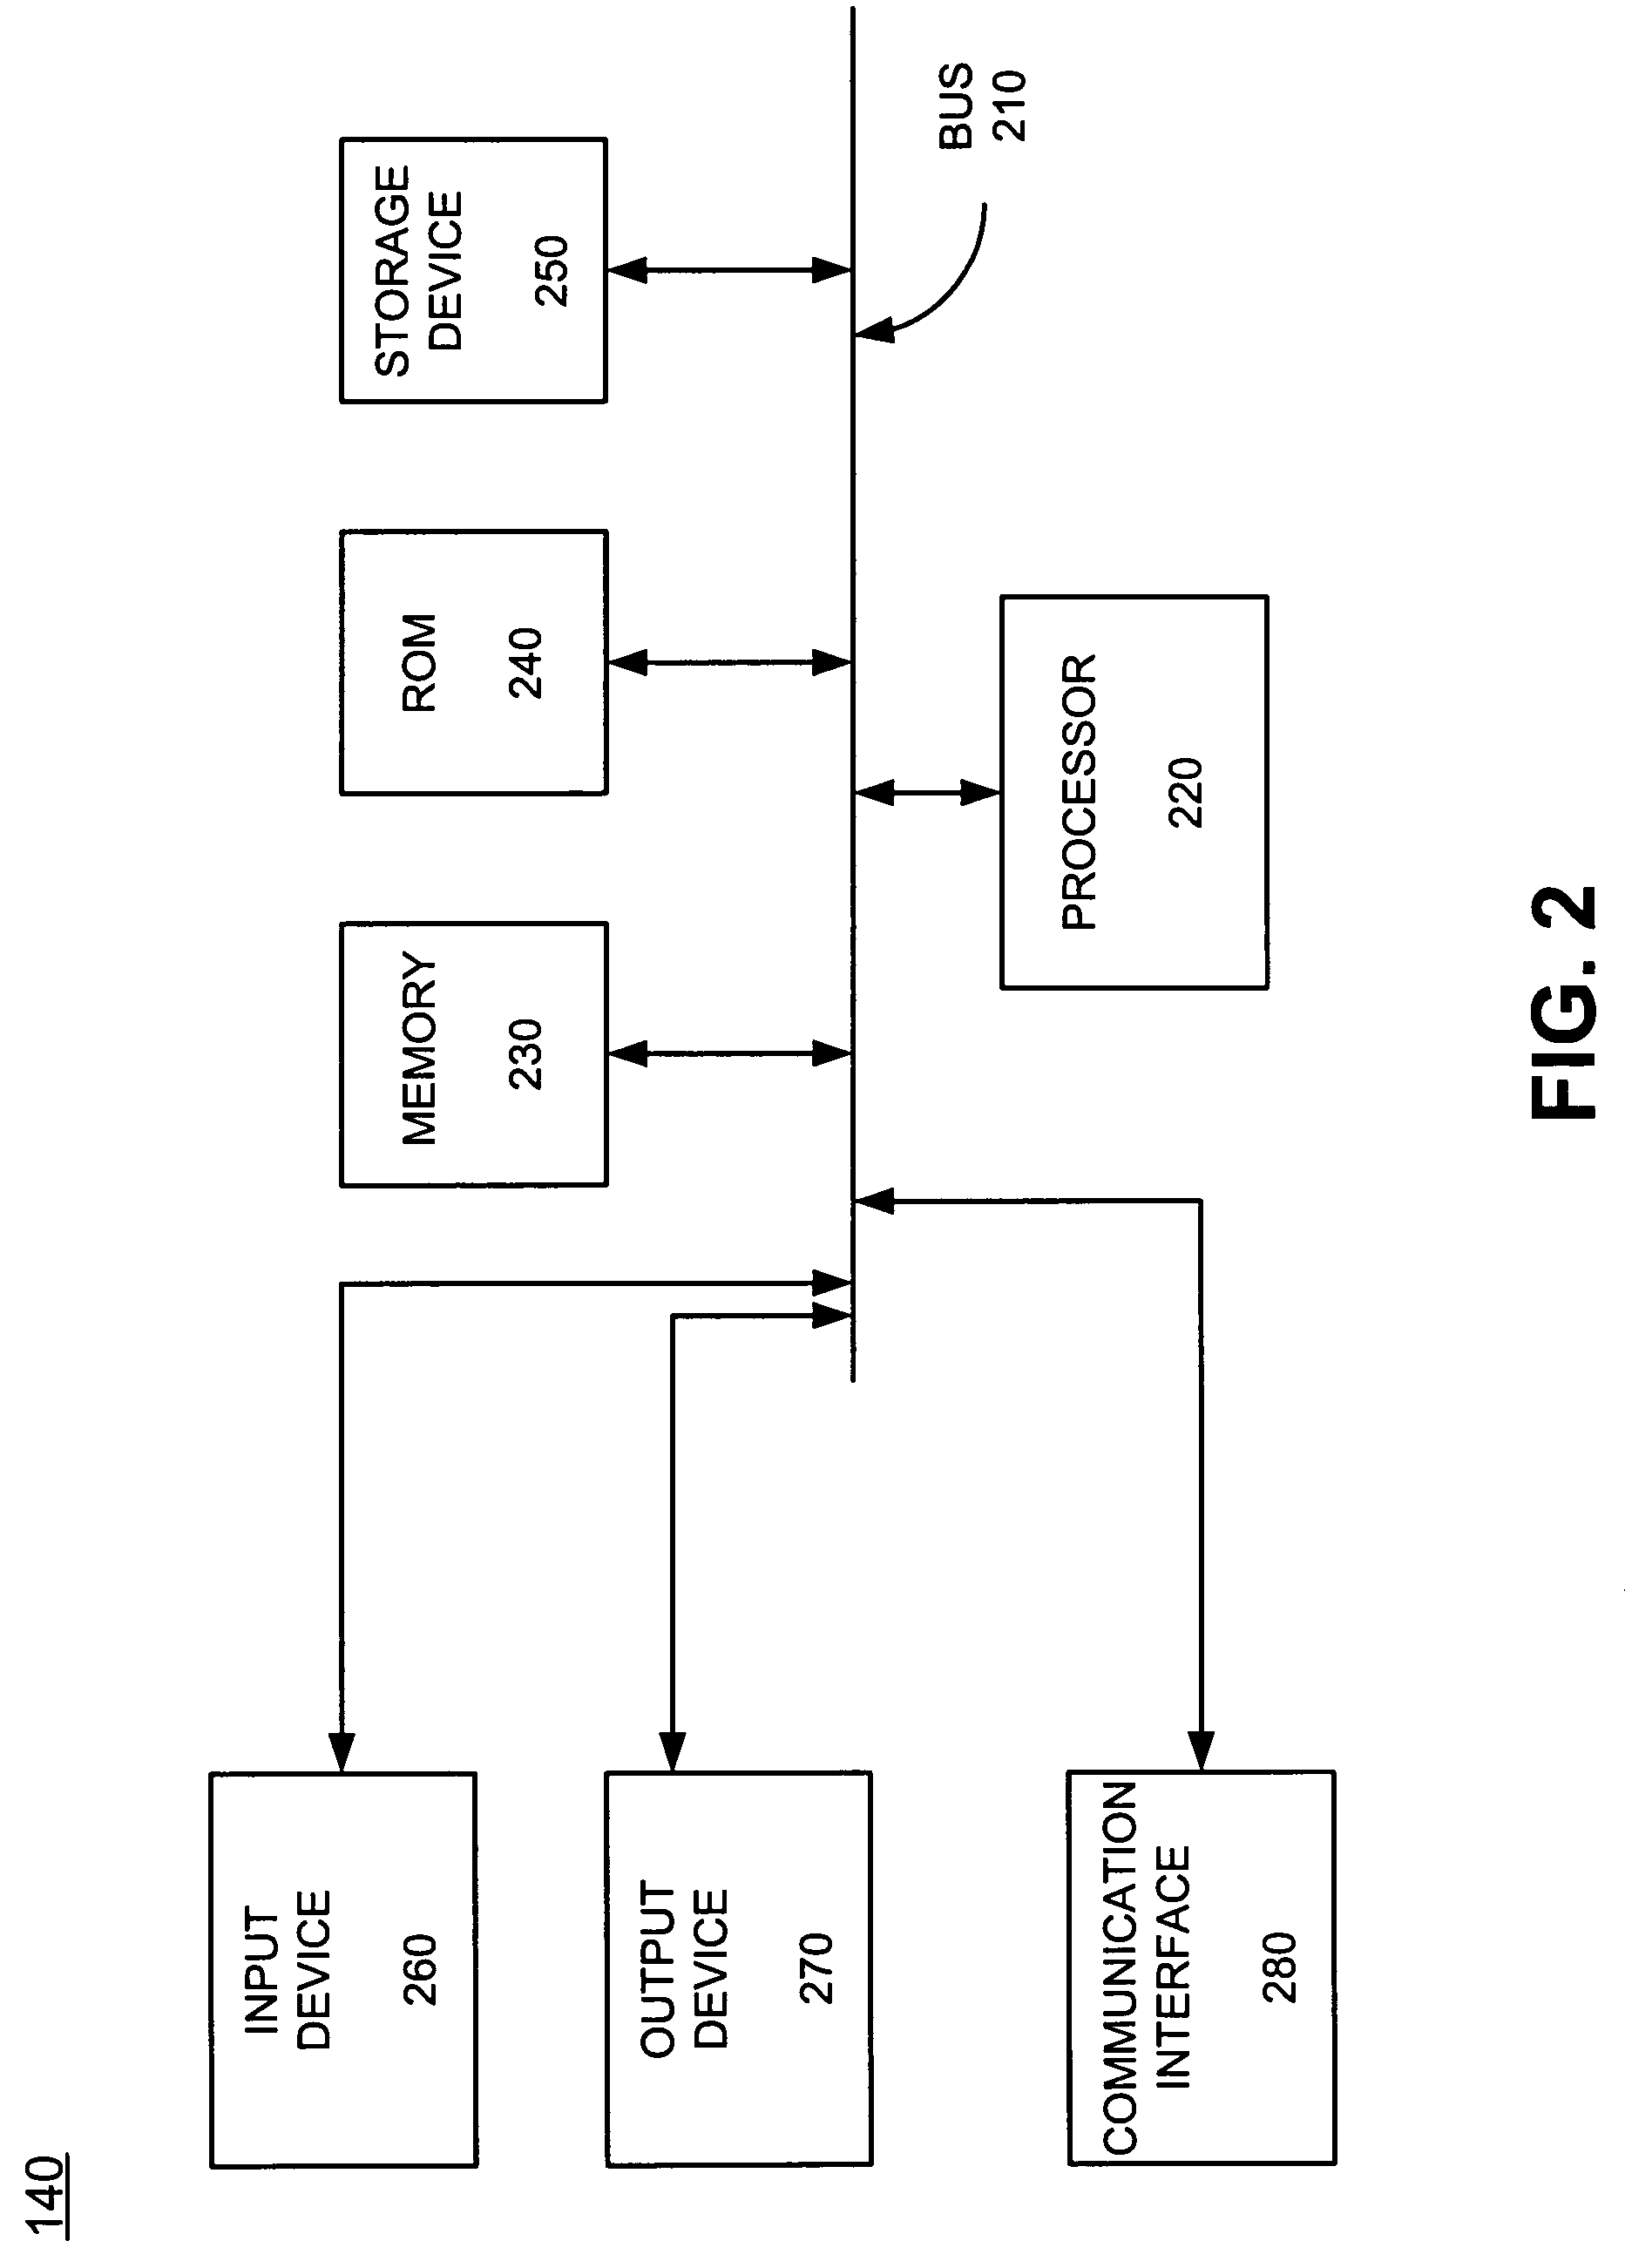 Systems and methods for generating and testing interactive voice response applications